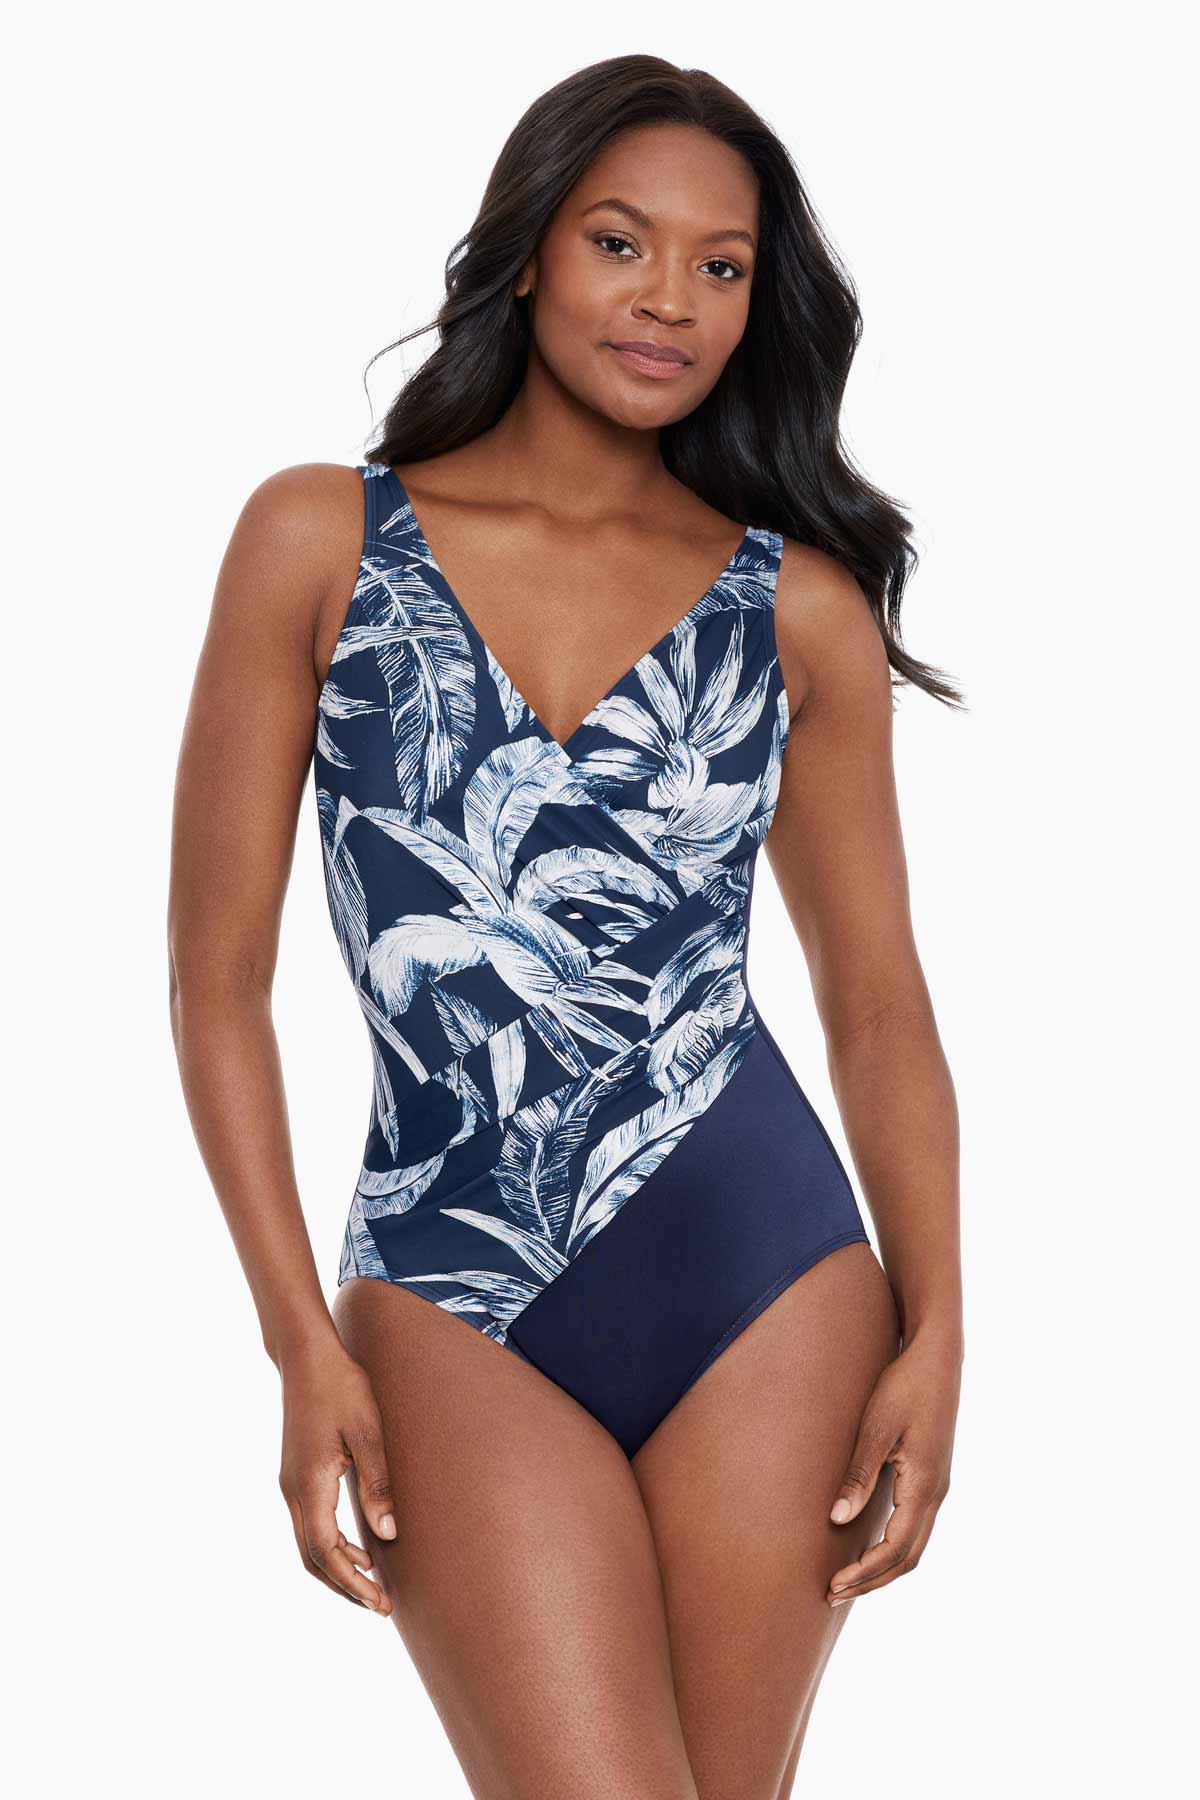 Miraclesuit Pin Point Oceanus One Piece Swimsuit